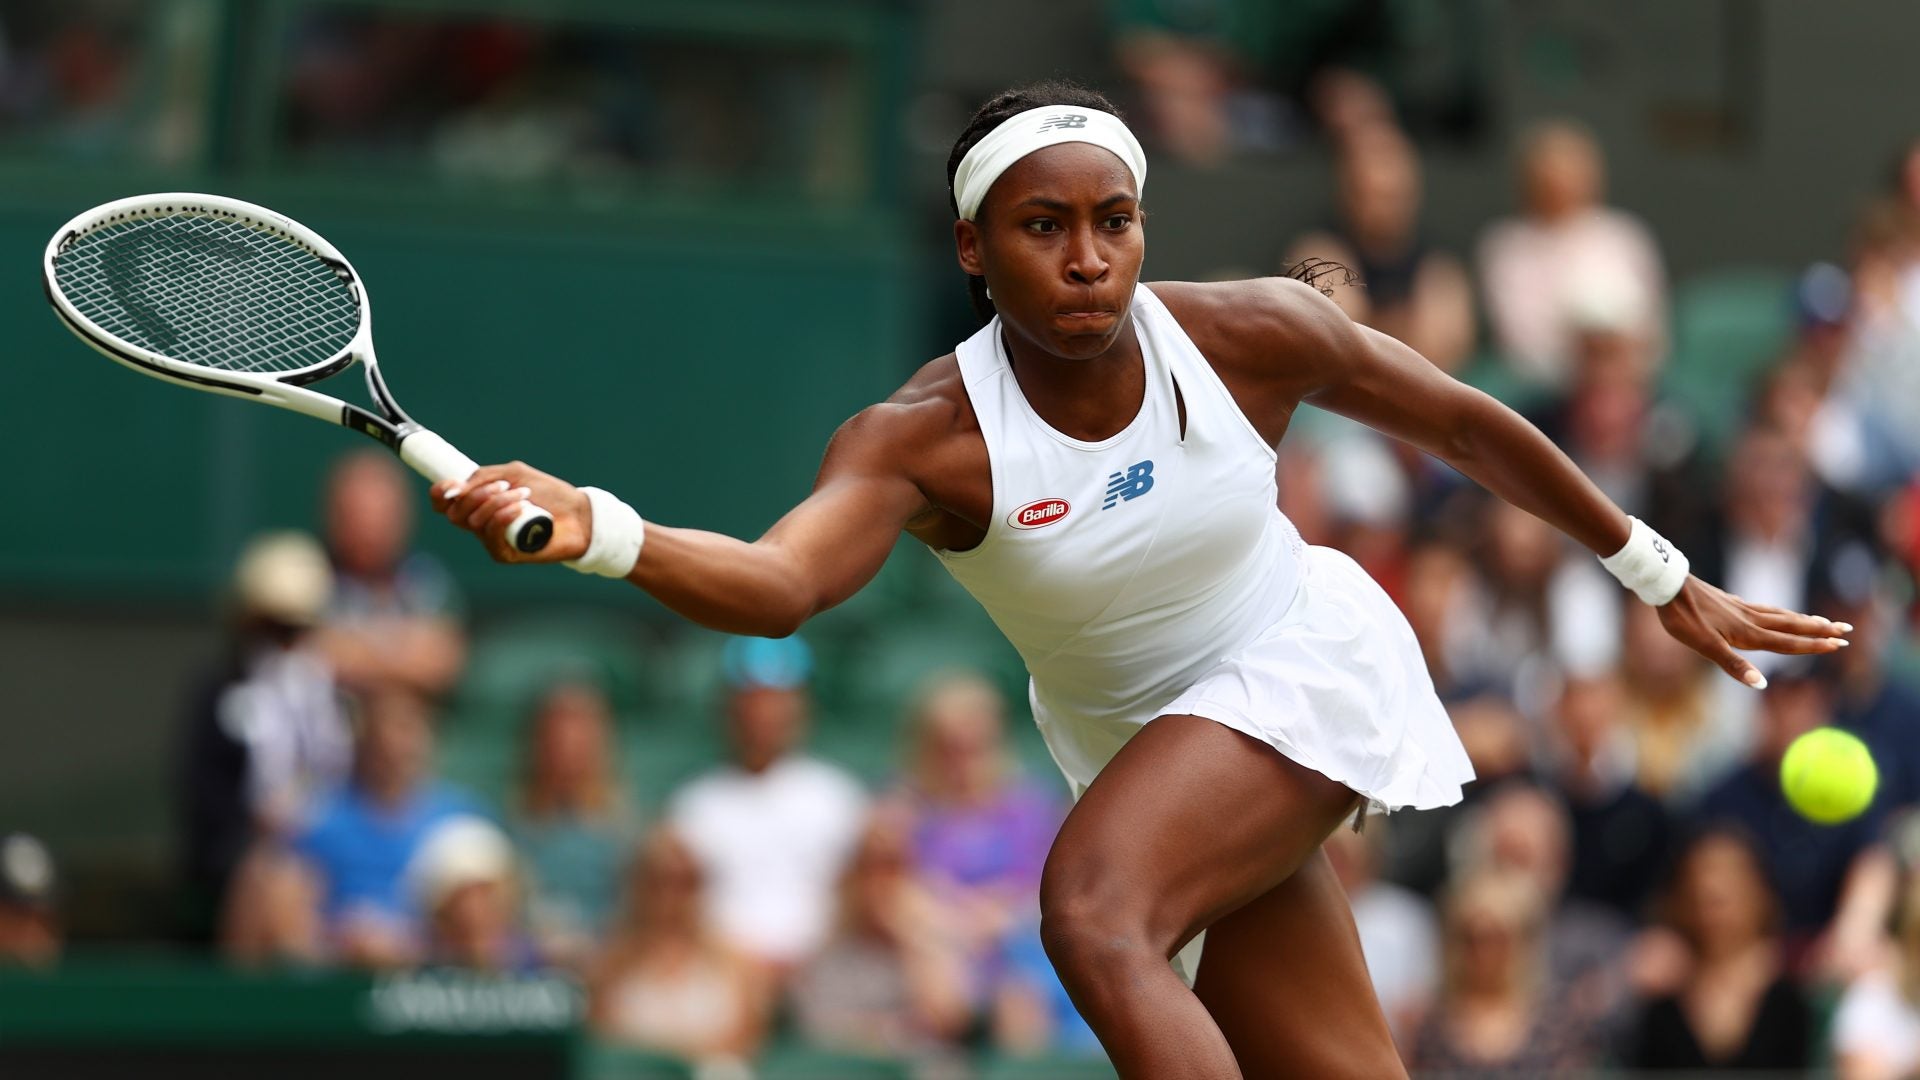 Tennis Player Coco Gauff Tests Positive For COVID-19, Will Not Attend Olympics